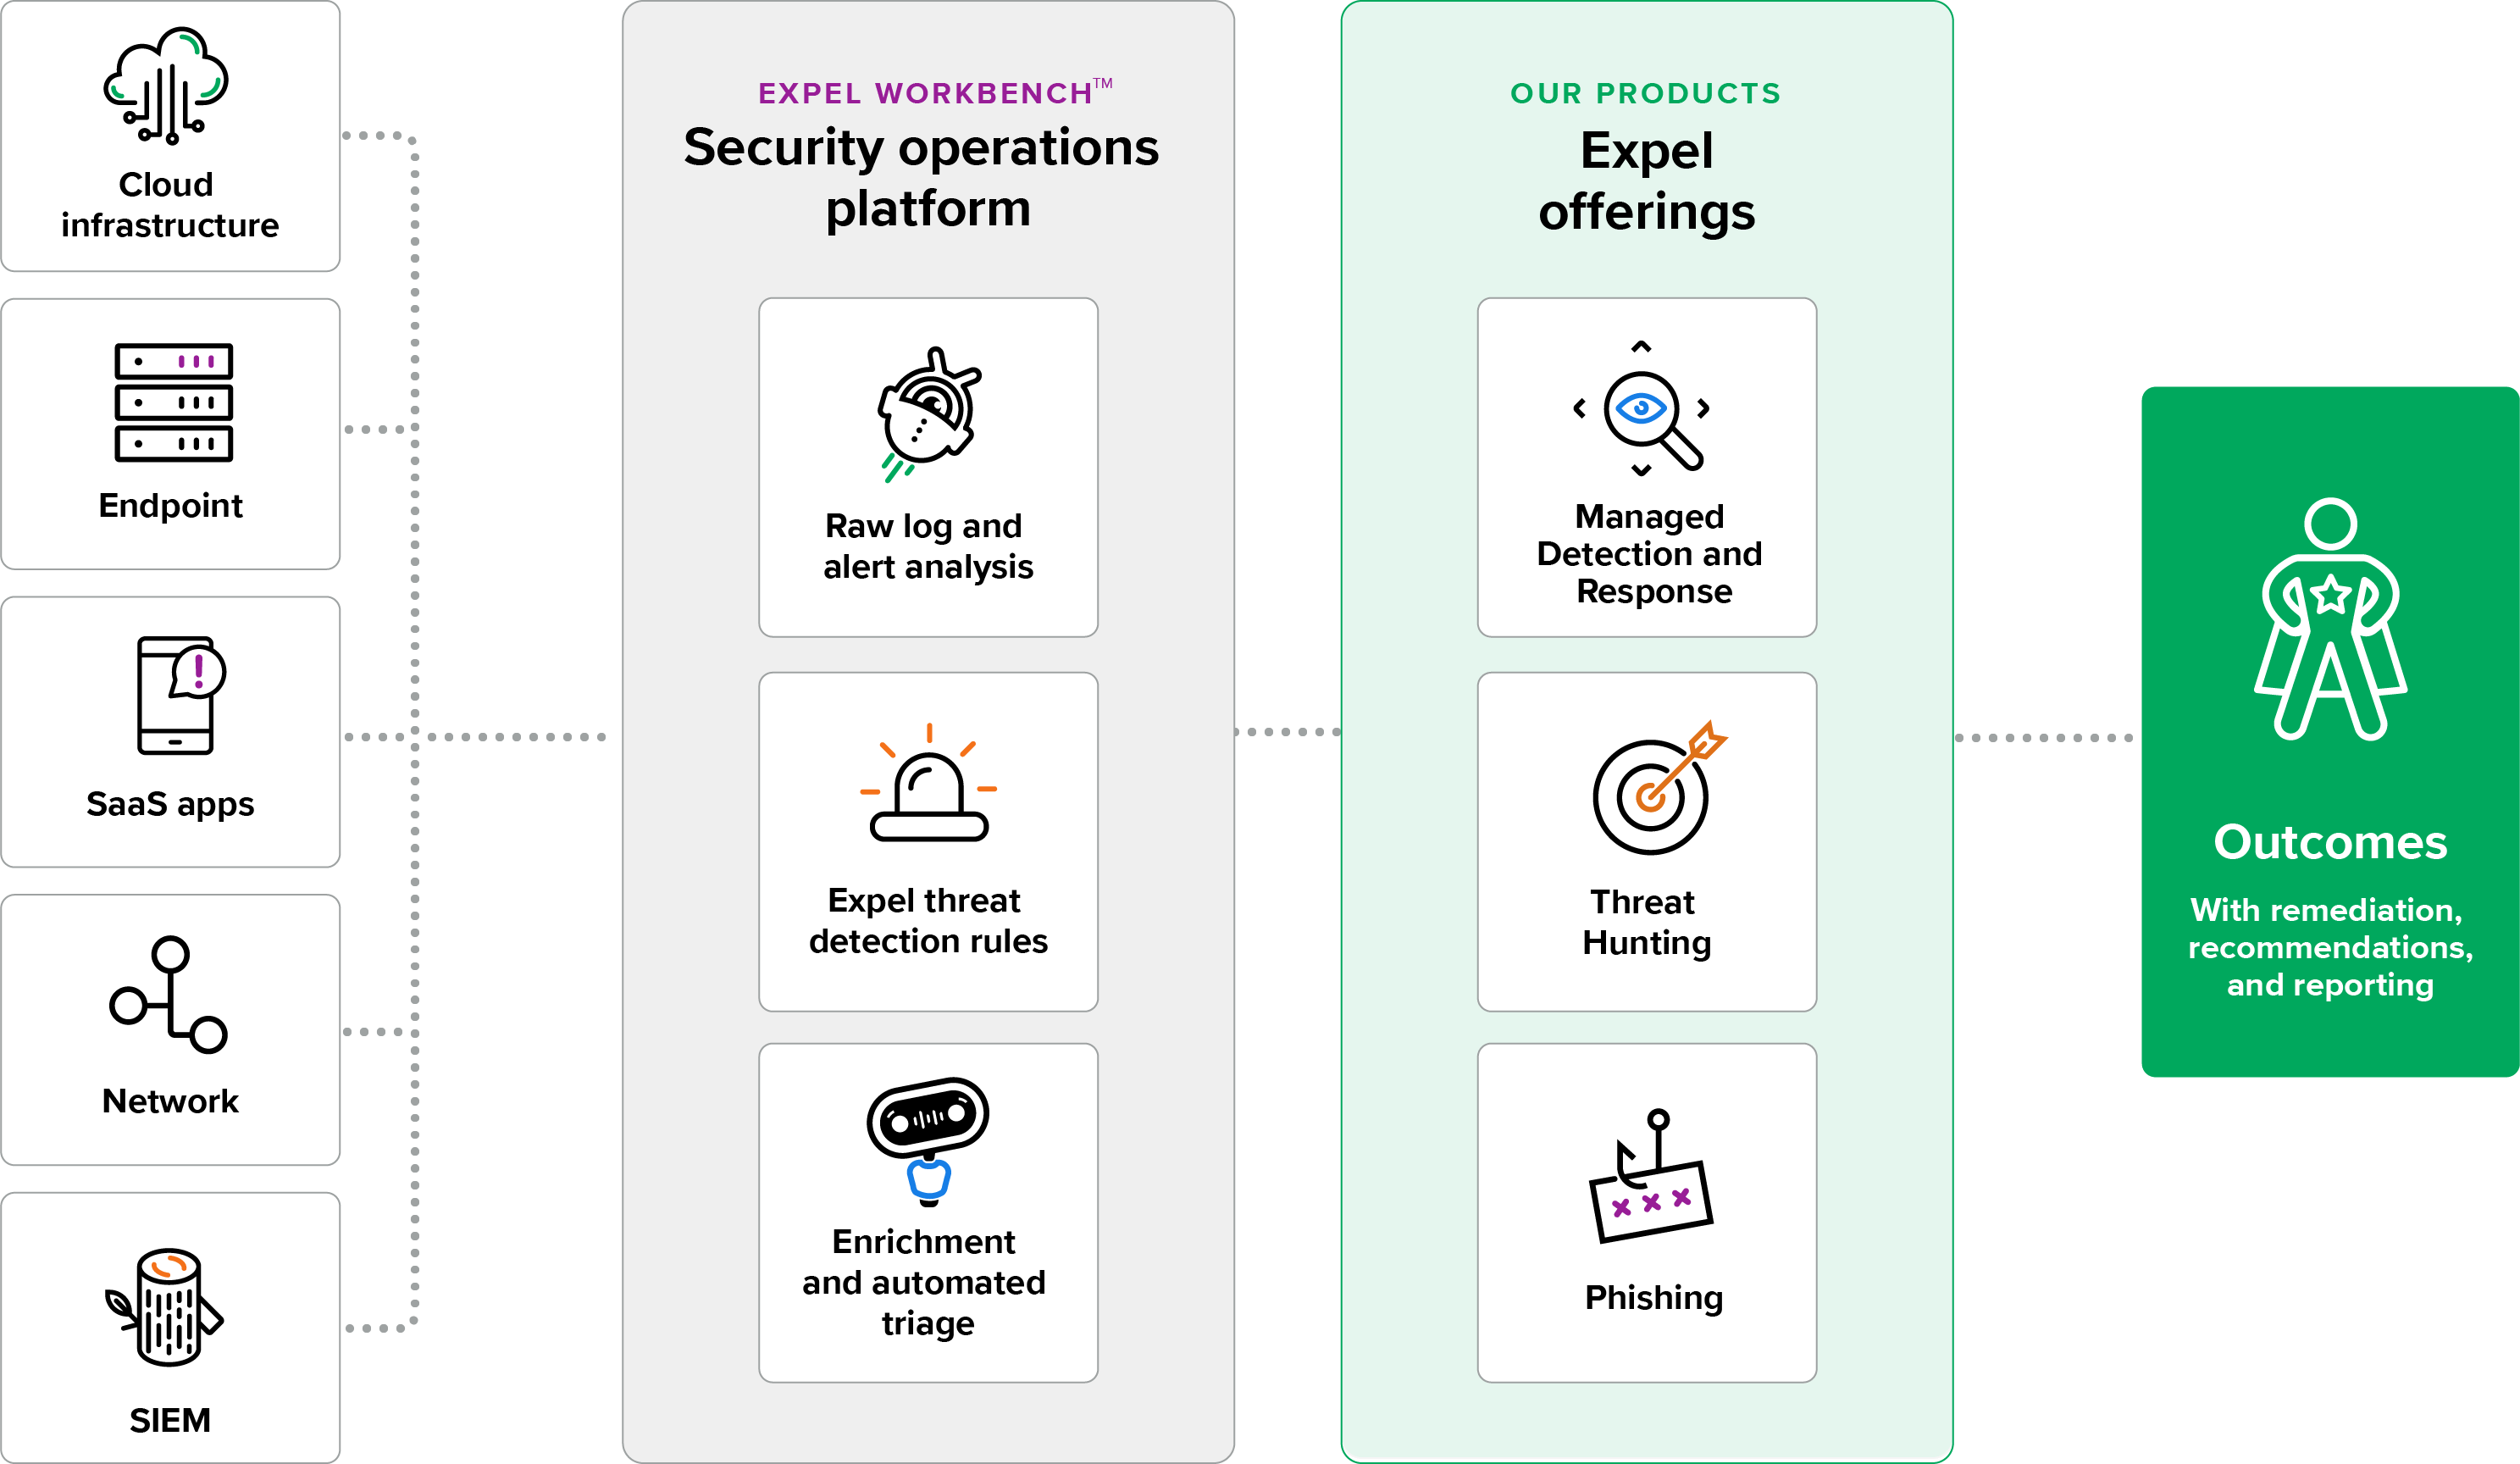 Expel security operations center overview graphic